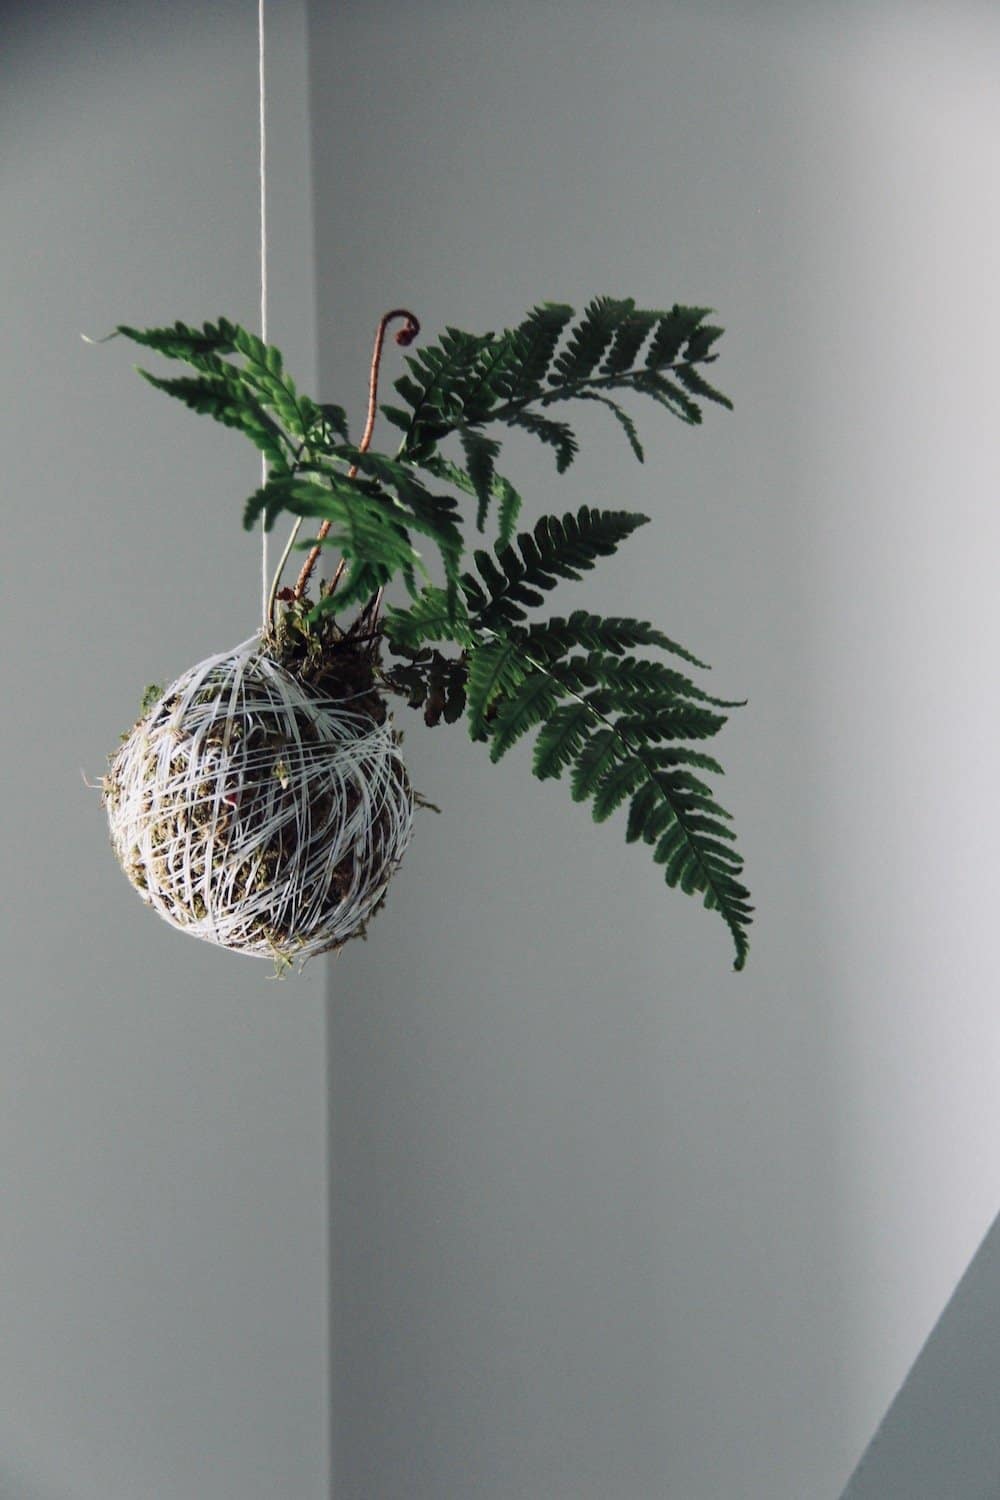 So making this fern kokedama this weekend! I love hanging string gardens and this is perfect for my ensuite bathroom #houseplants #stringgardens #kokedama #bathroomplants